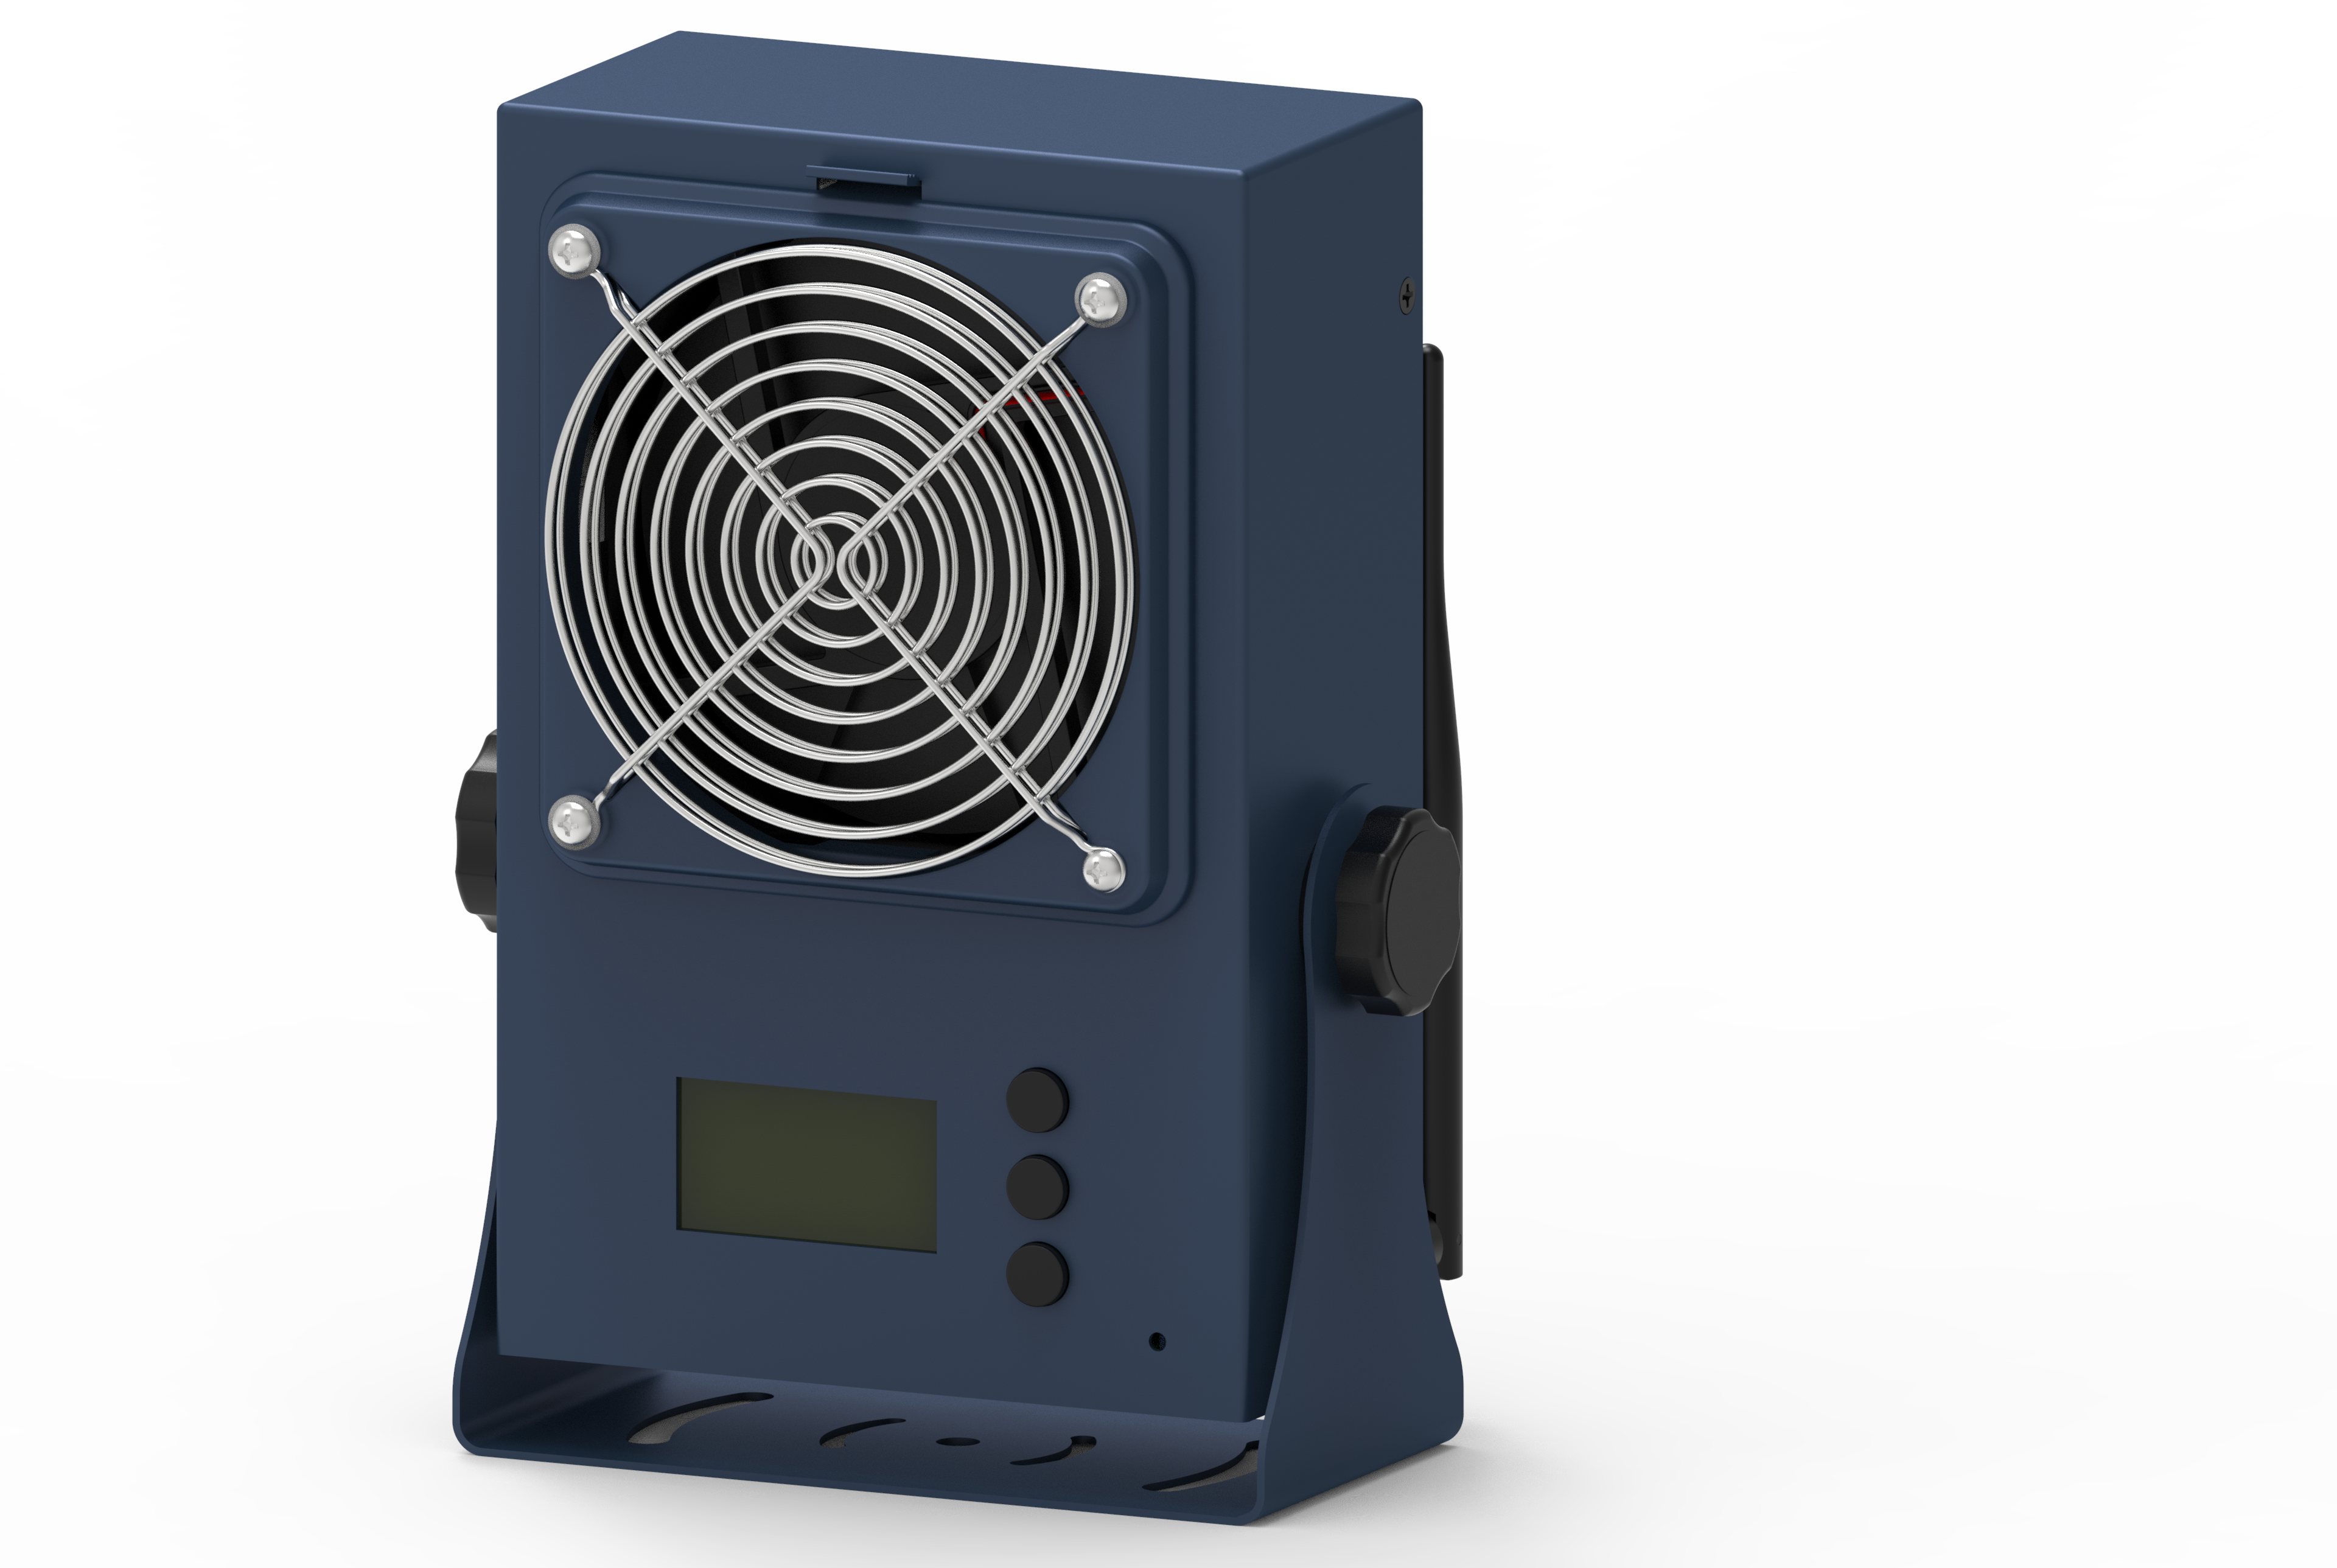 BAKON ESD-IOT6001 Smart DC ion fan effectively eliminates waiting for you